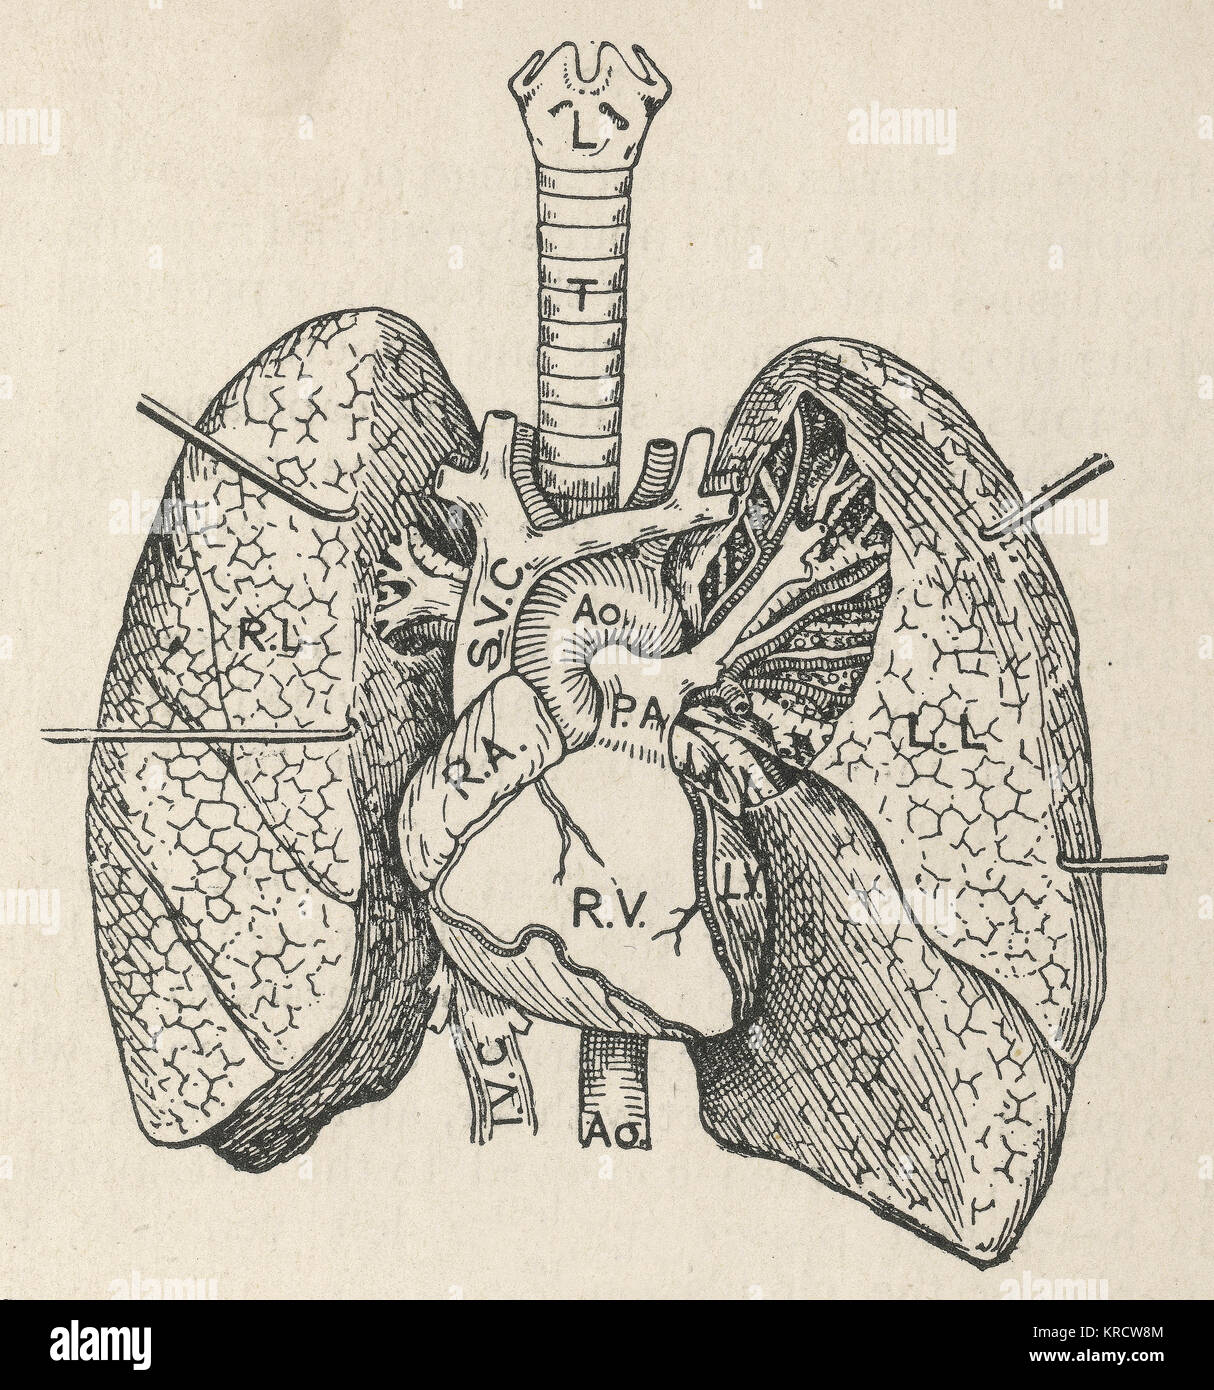 Lungs Diagram High Resolution Stock Photography and Images ...